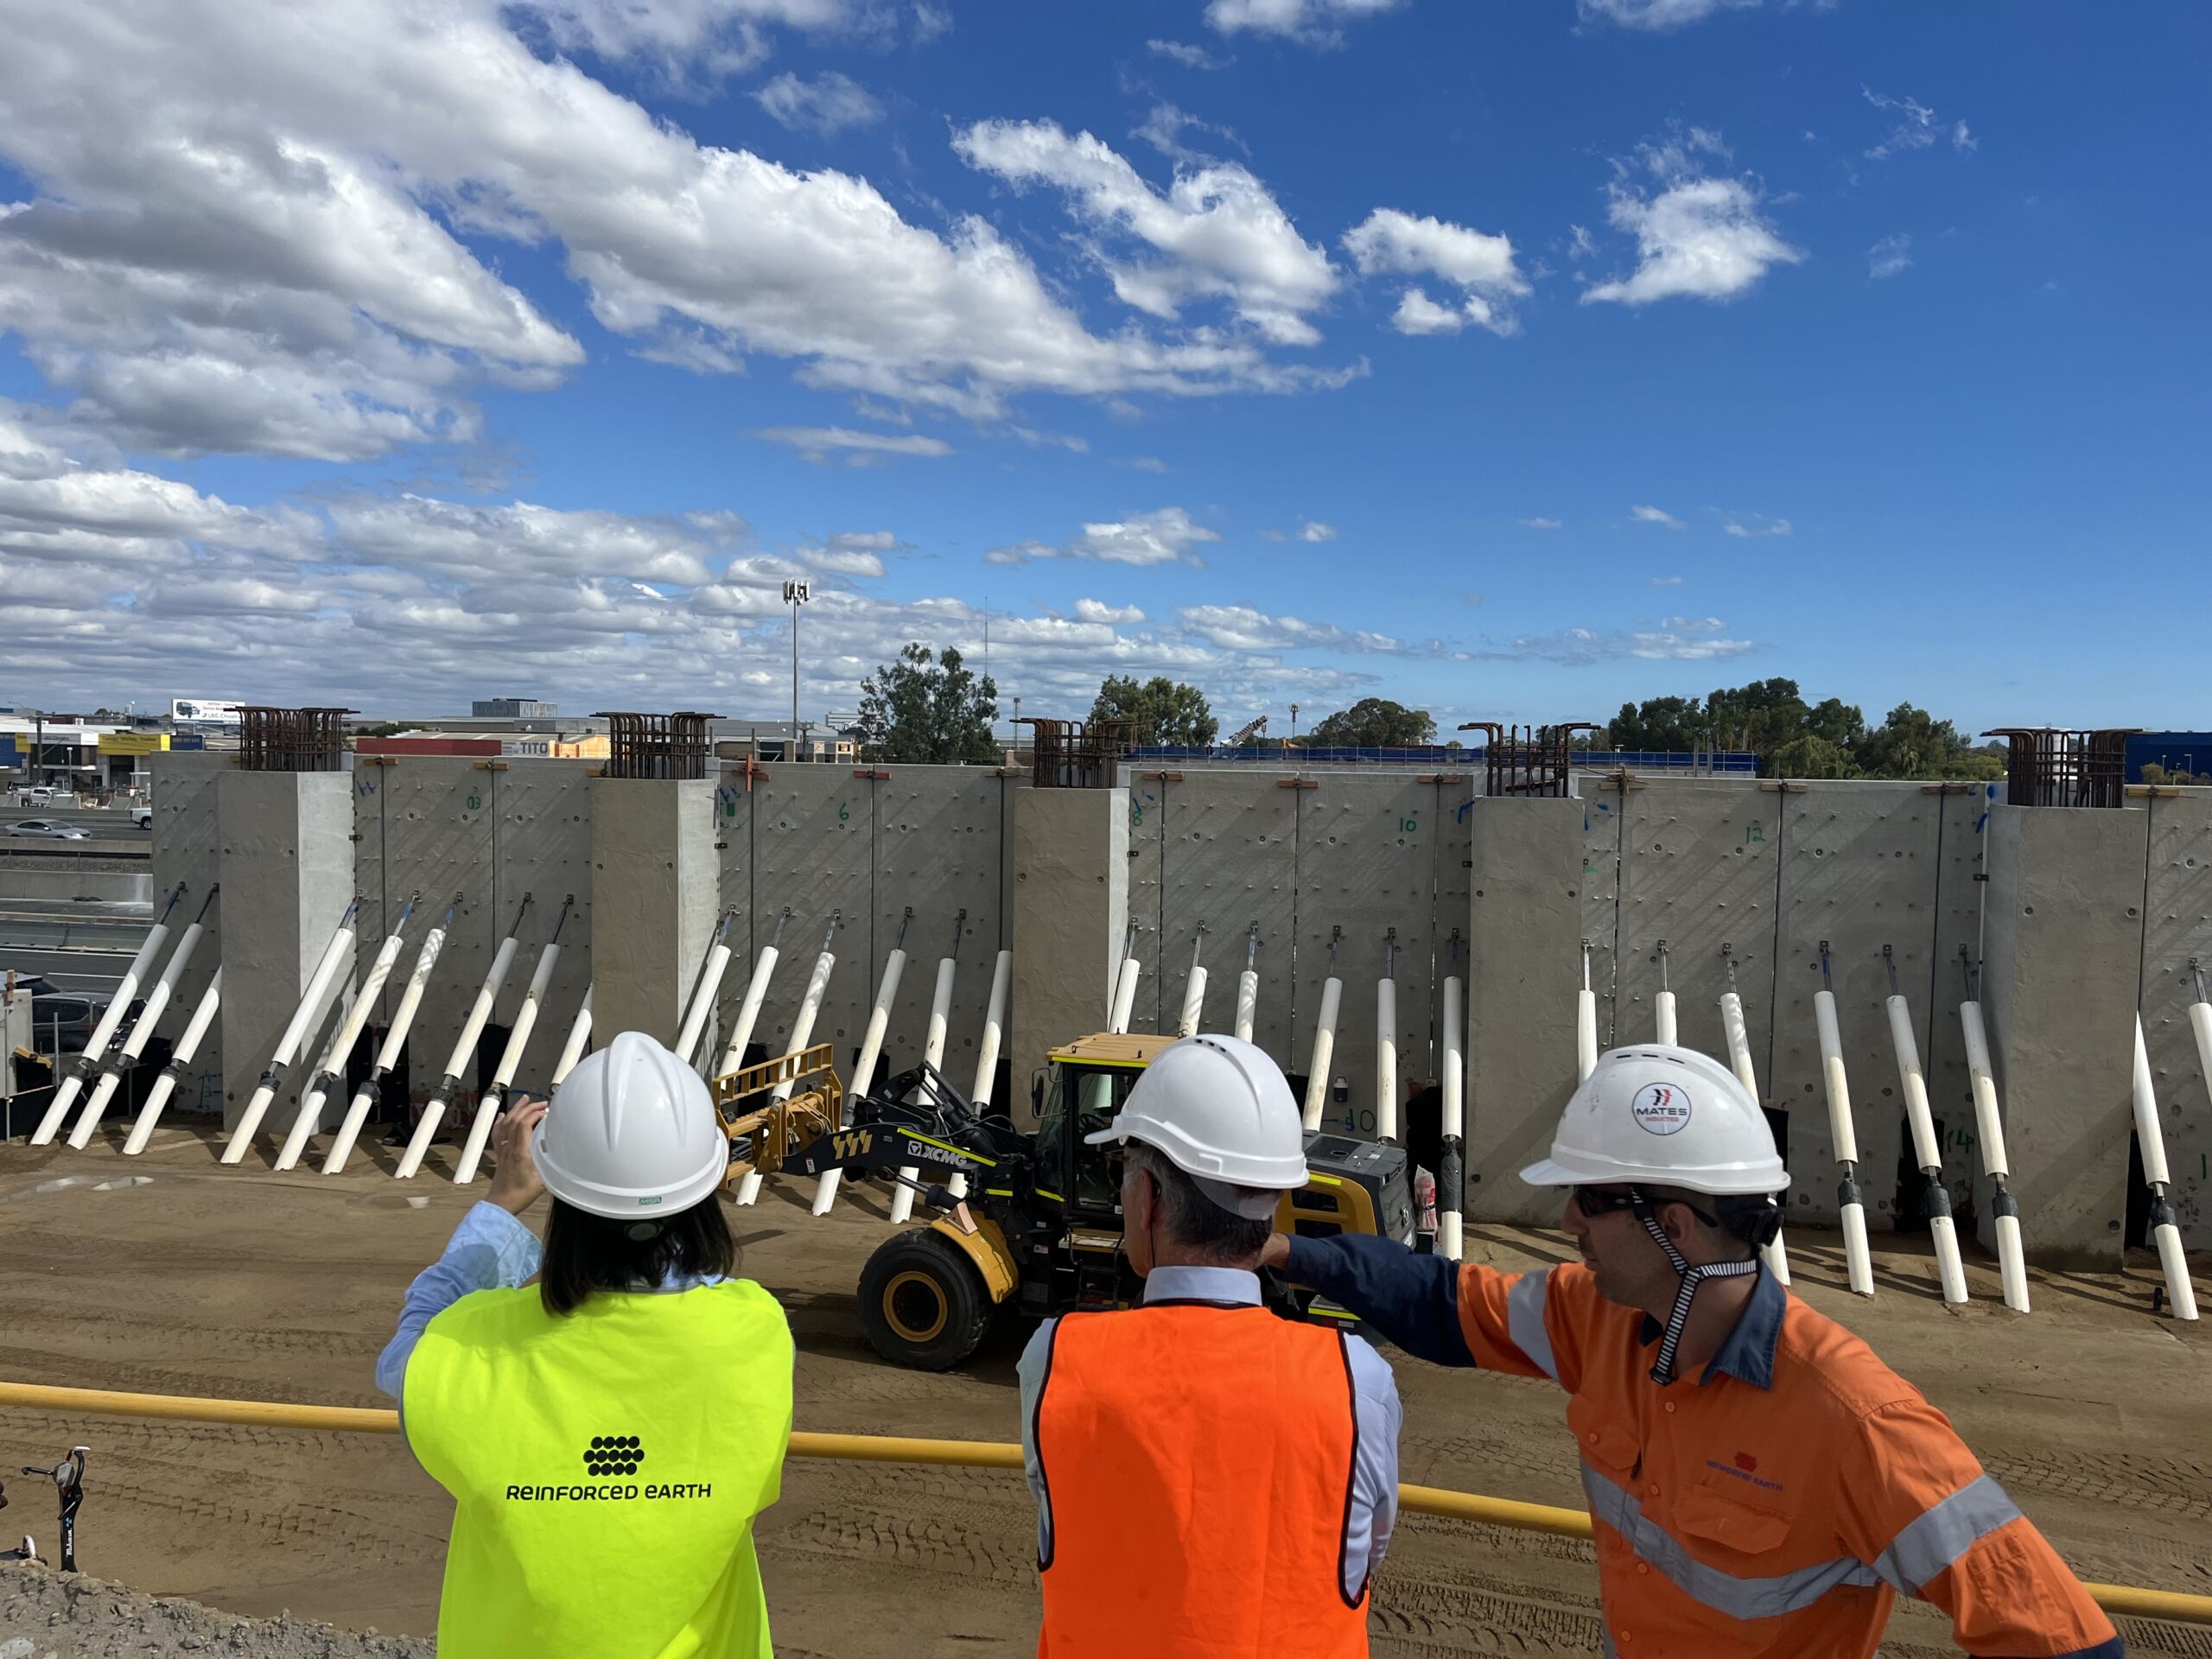 Reinforced Earth engineers in high vis vests survey precast concrete walls at the road infrastrcutrue project, Stephenson Road Extension, at Perth's Mitchell Freeway.